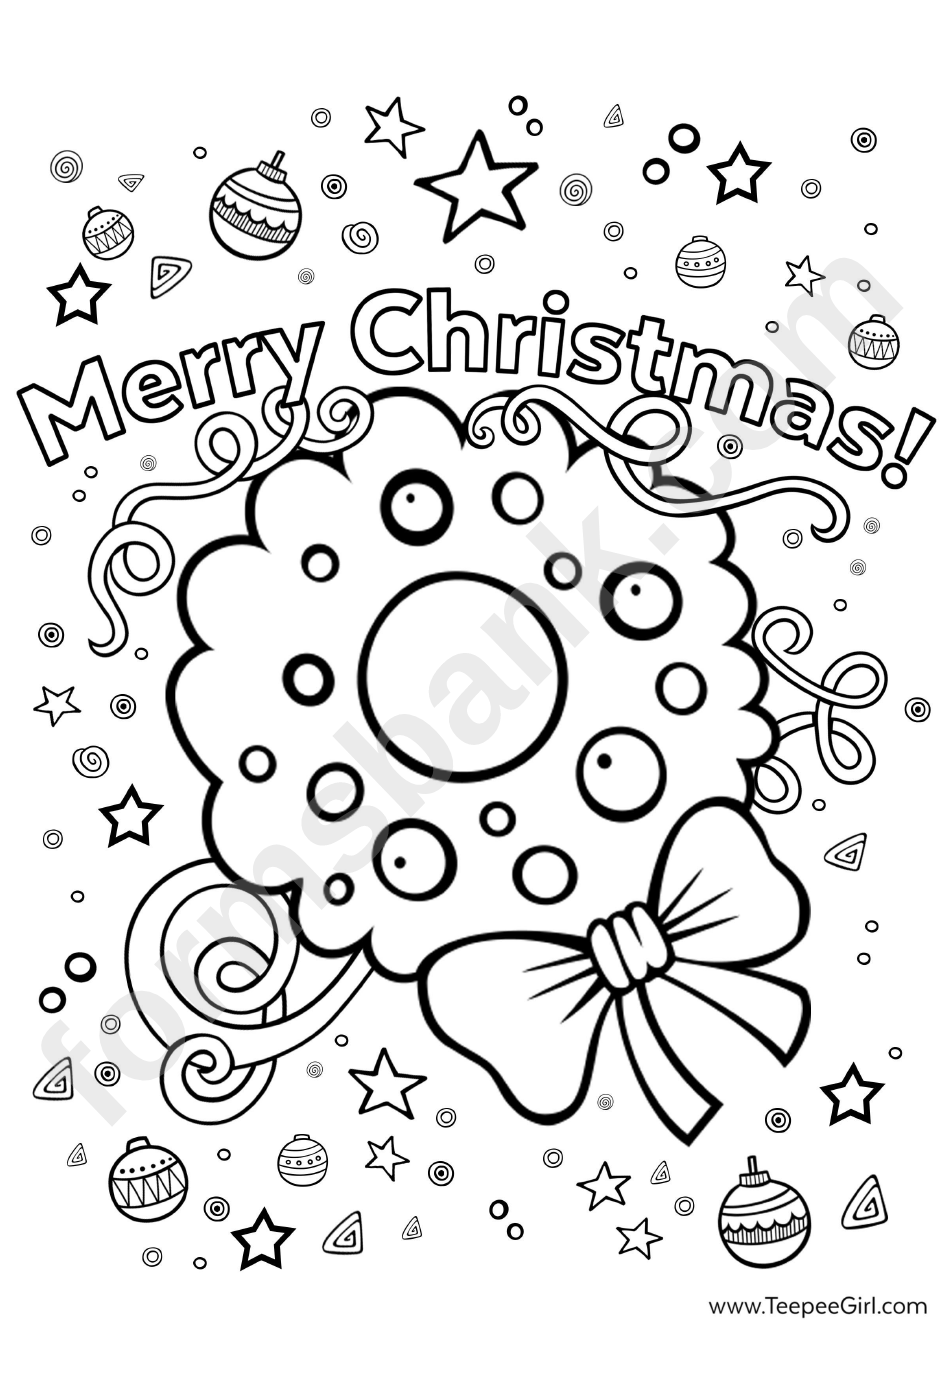 Merry Christmas & New Year Coloring Sheets